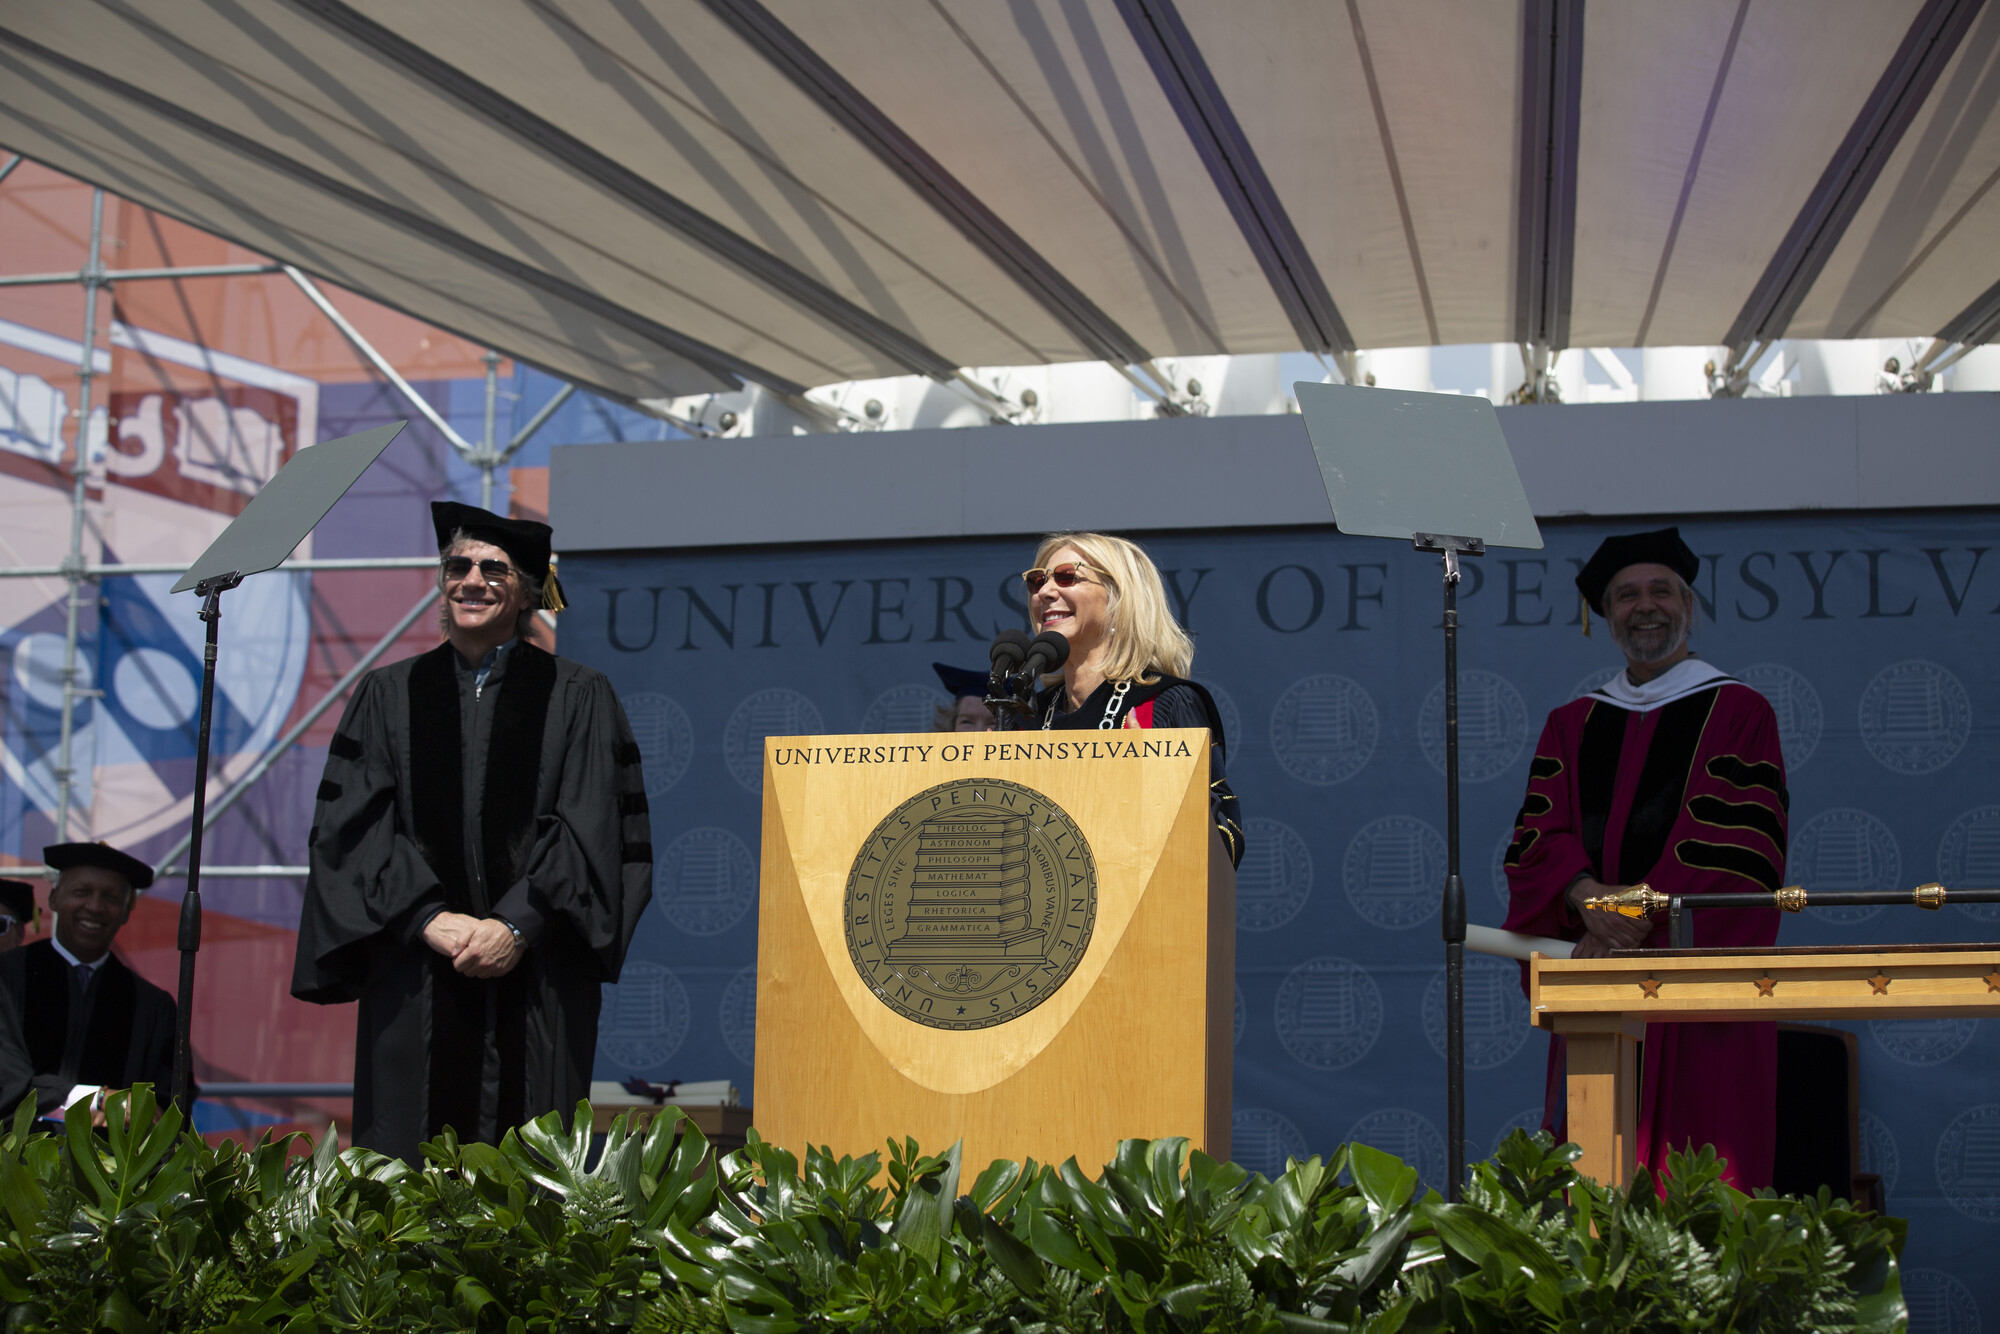 Jon Bon Jovi, Amy Gutmann and Michael Delli Carpini on stage during commencement, Gutmann is at a podium.